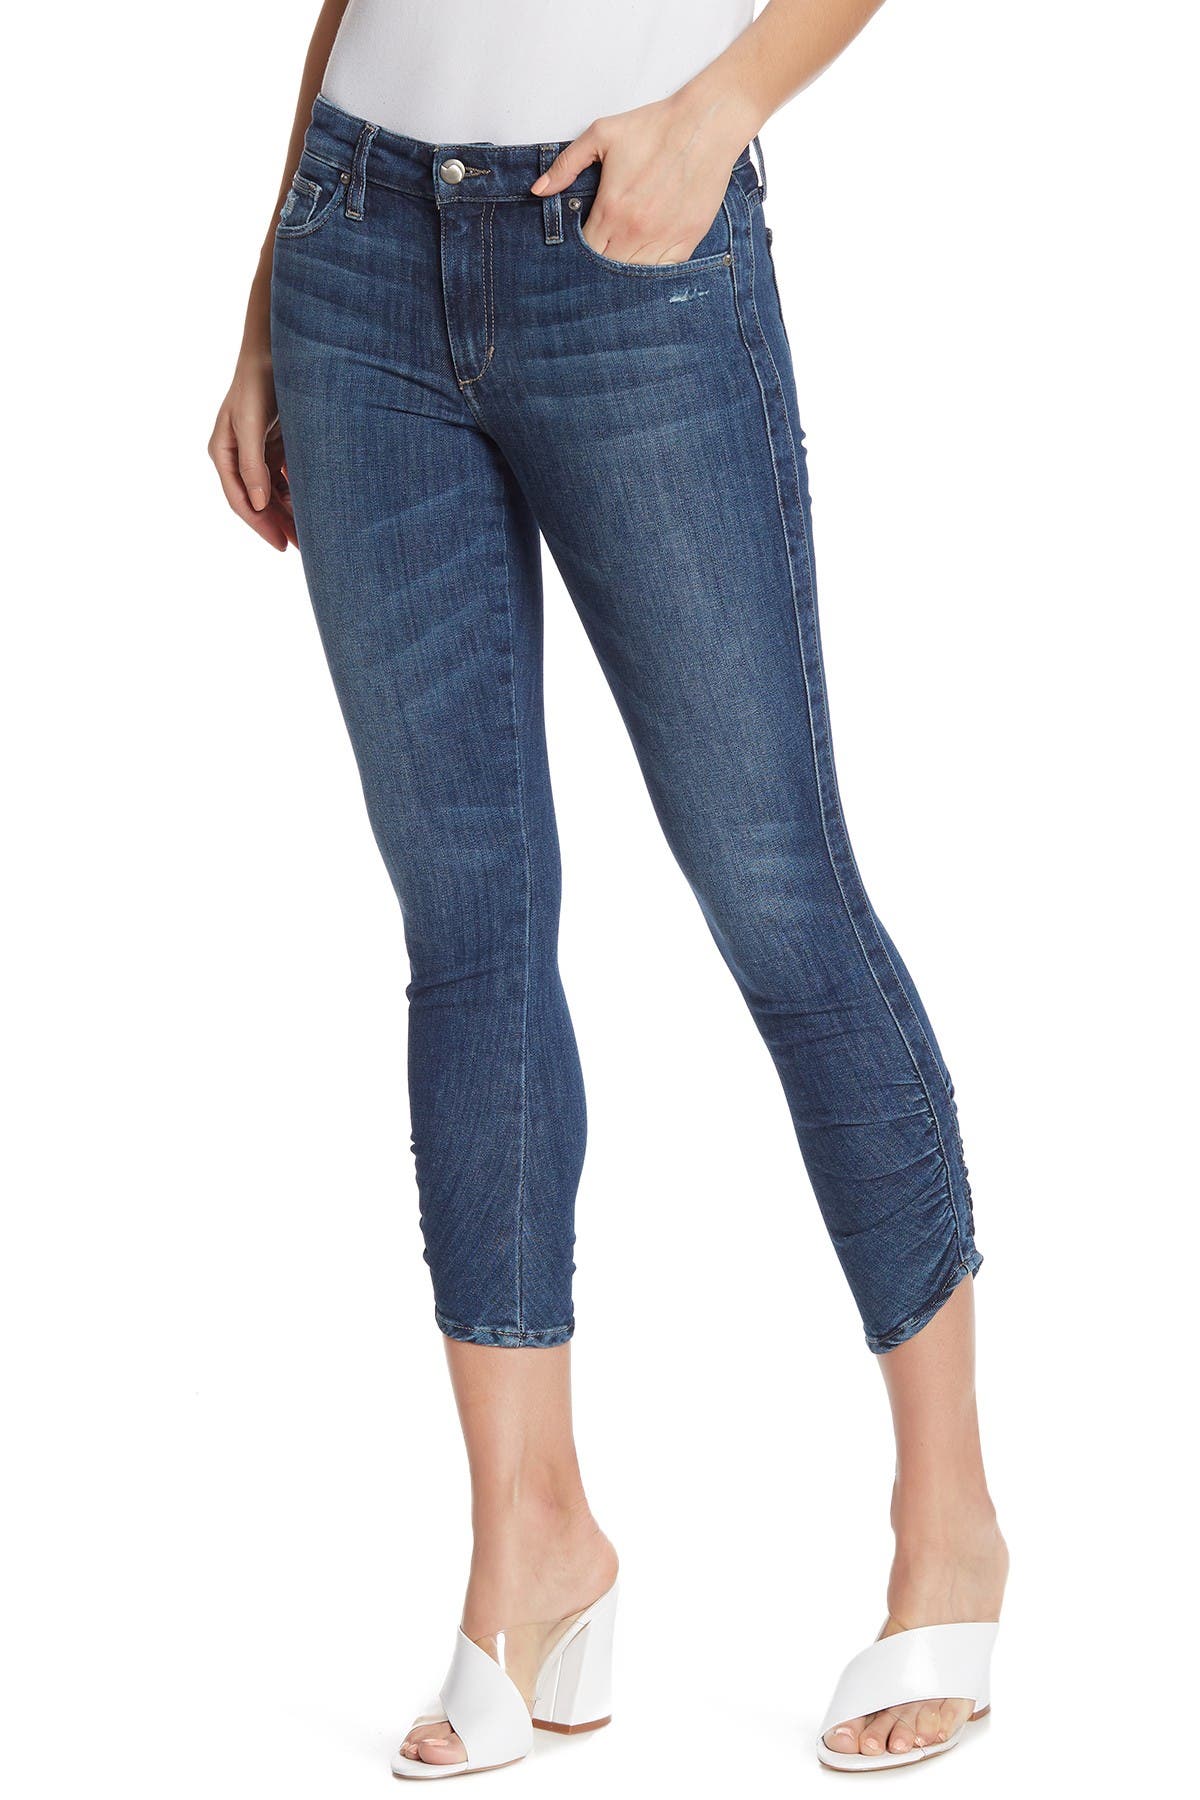 Joes Jeans Womens Icon Midrse Skinny Ankle Jean